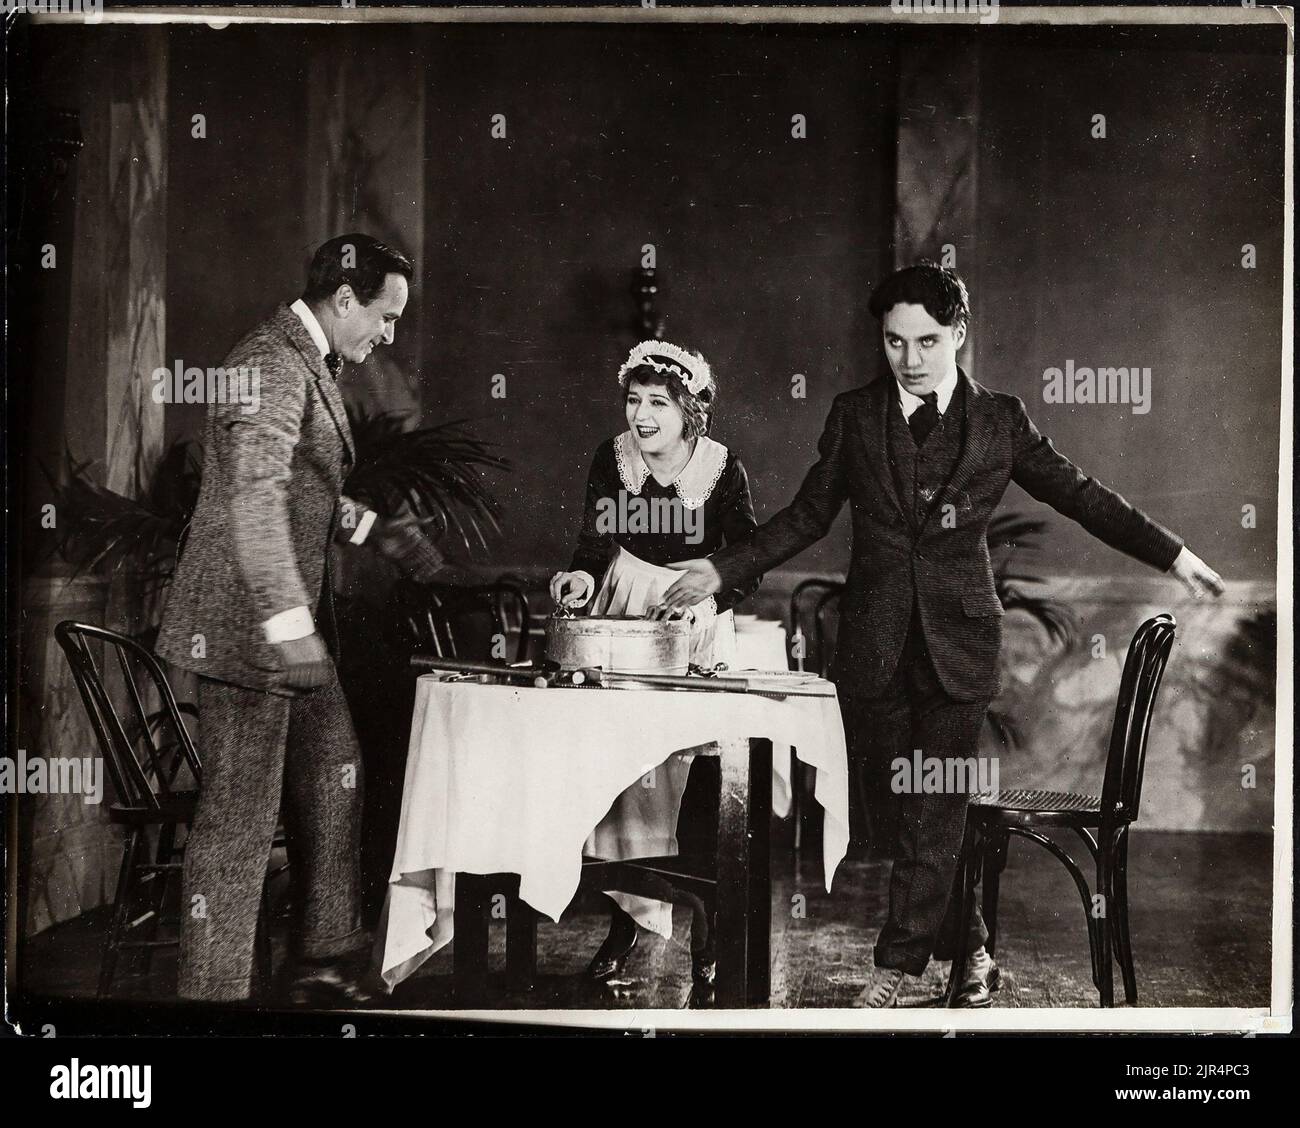 Founders of United Artists - Charlie Chaplin, Mary Pickford, and Douglas Fairbanks. Vintage 1920s photo. Stock Photo